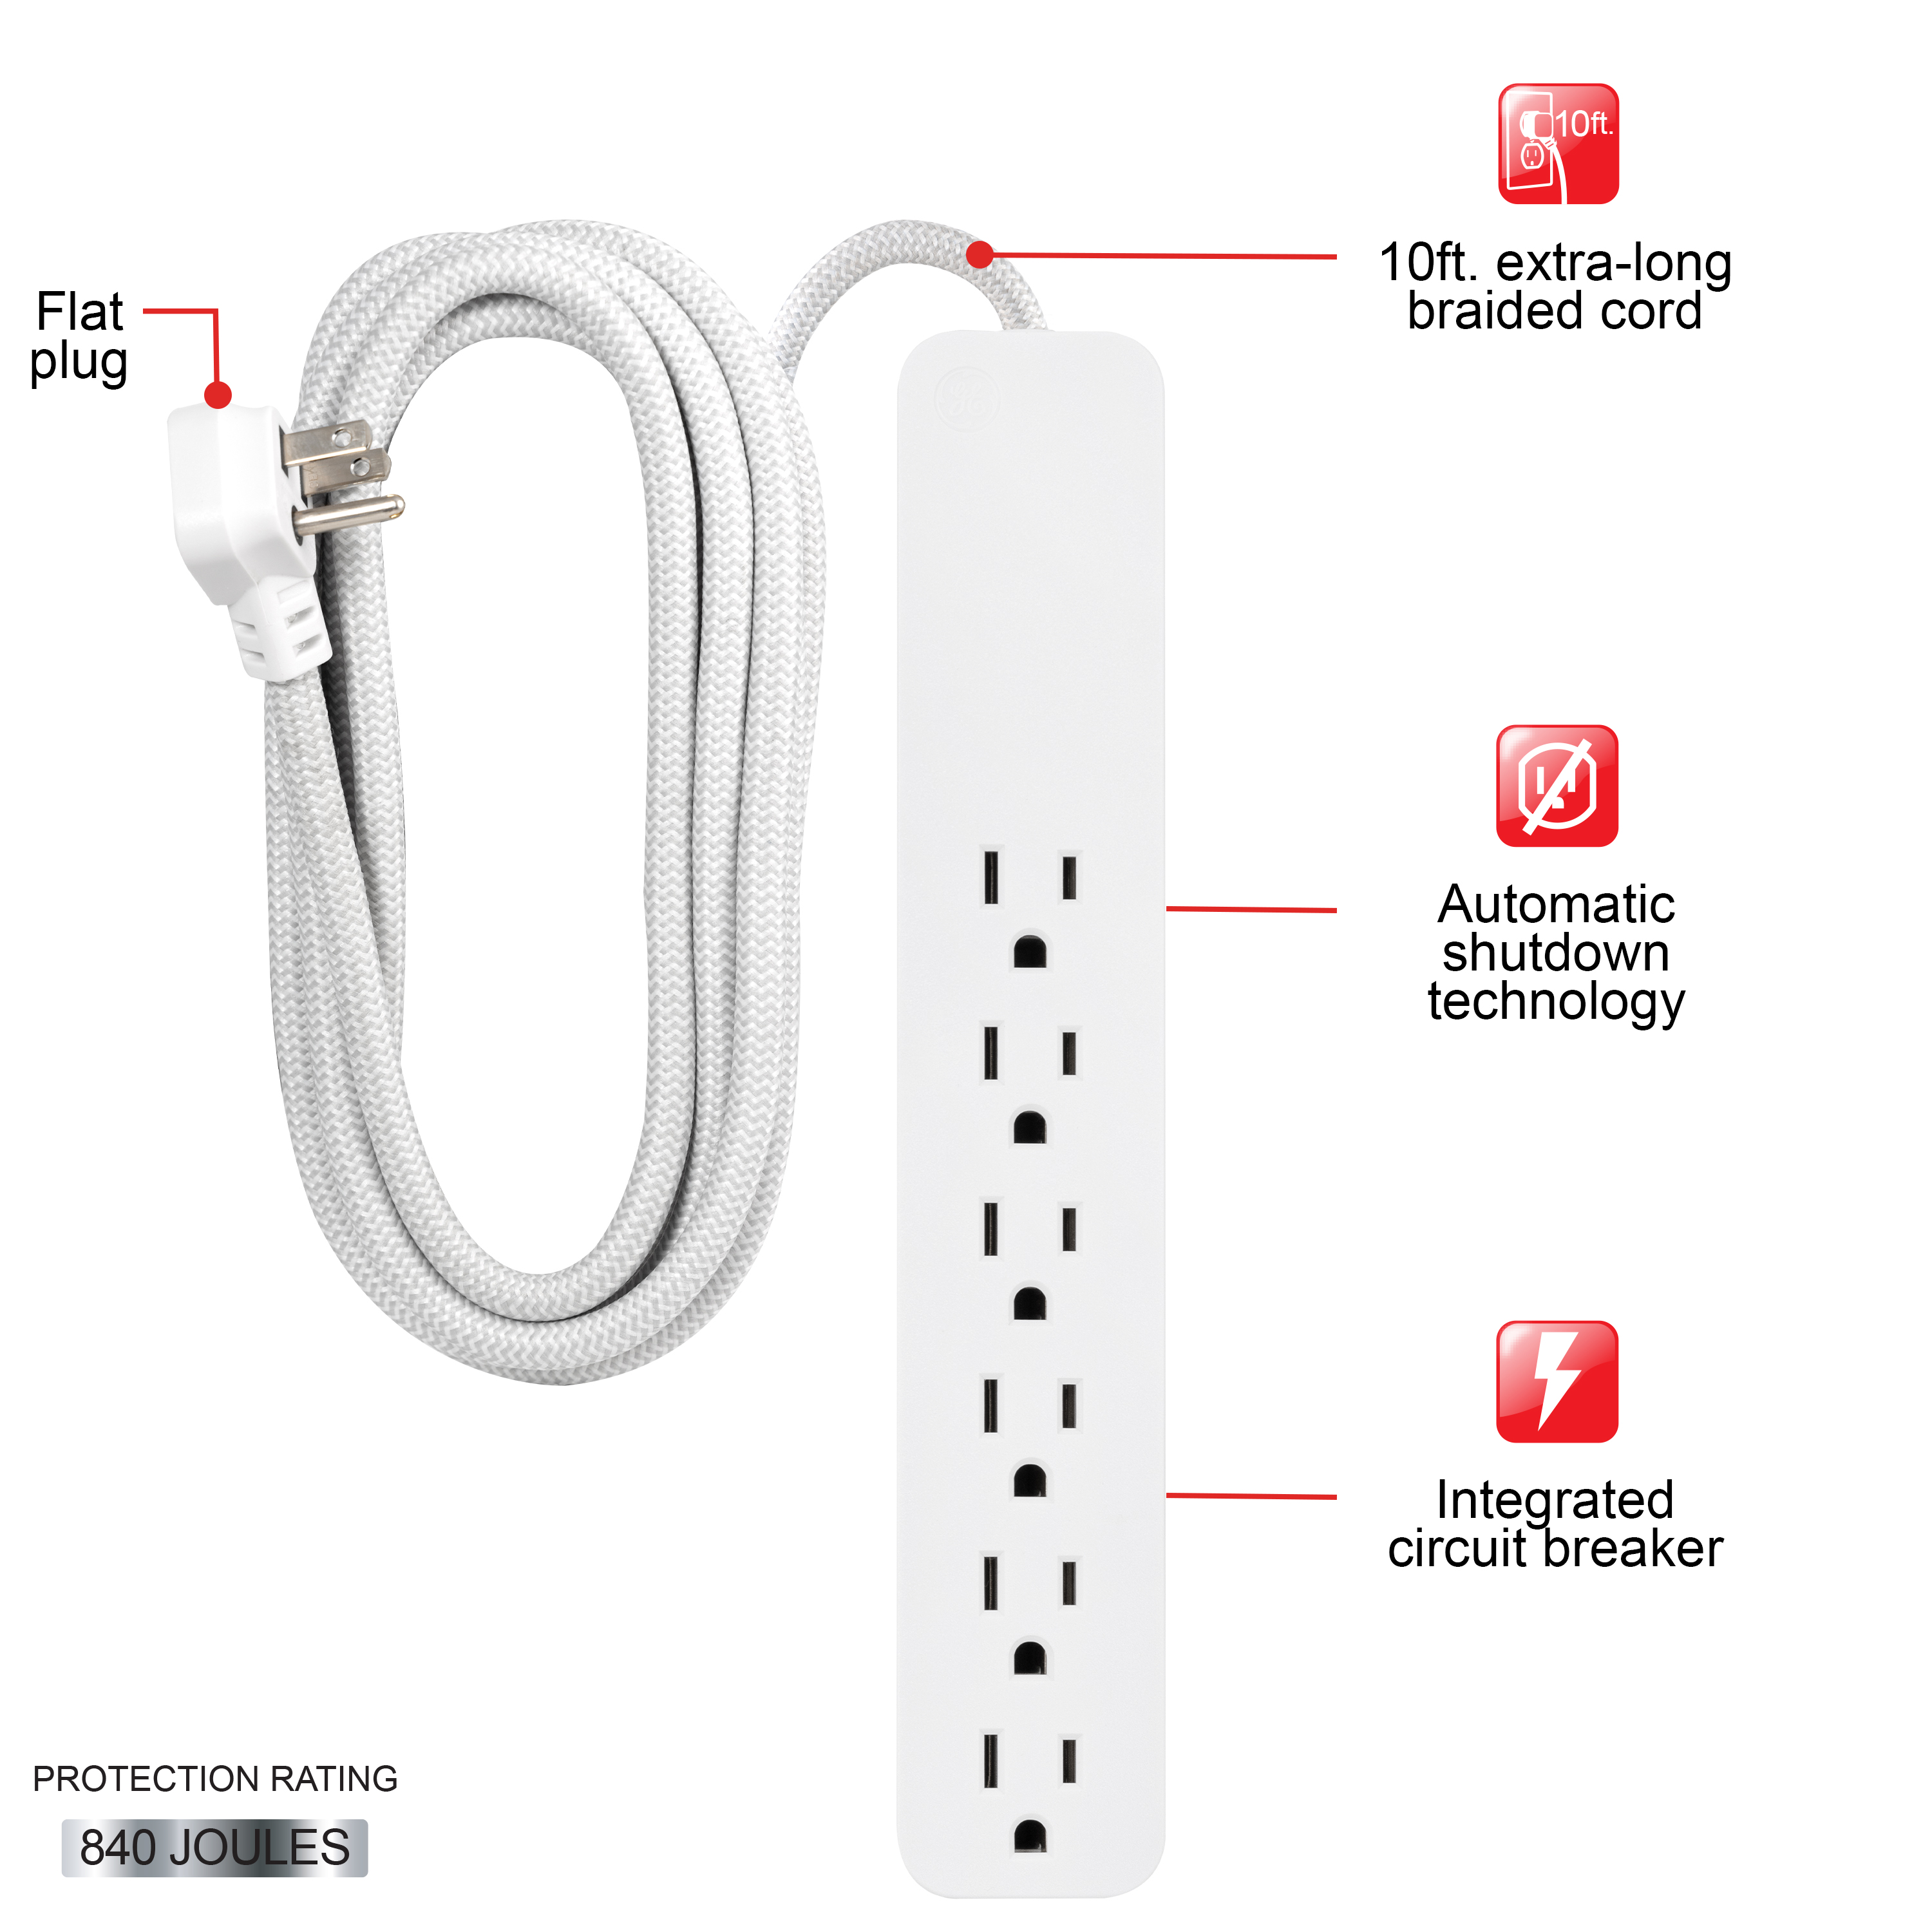 GE 6-Outlet Surge Protector, 840J, 10ft. Braided Cord, White, 62933 - image 2 of 7